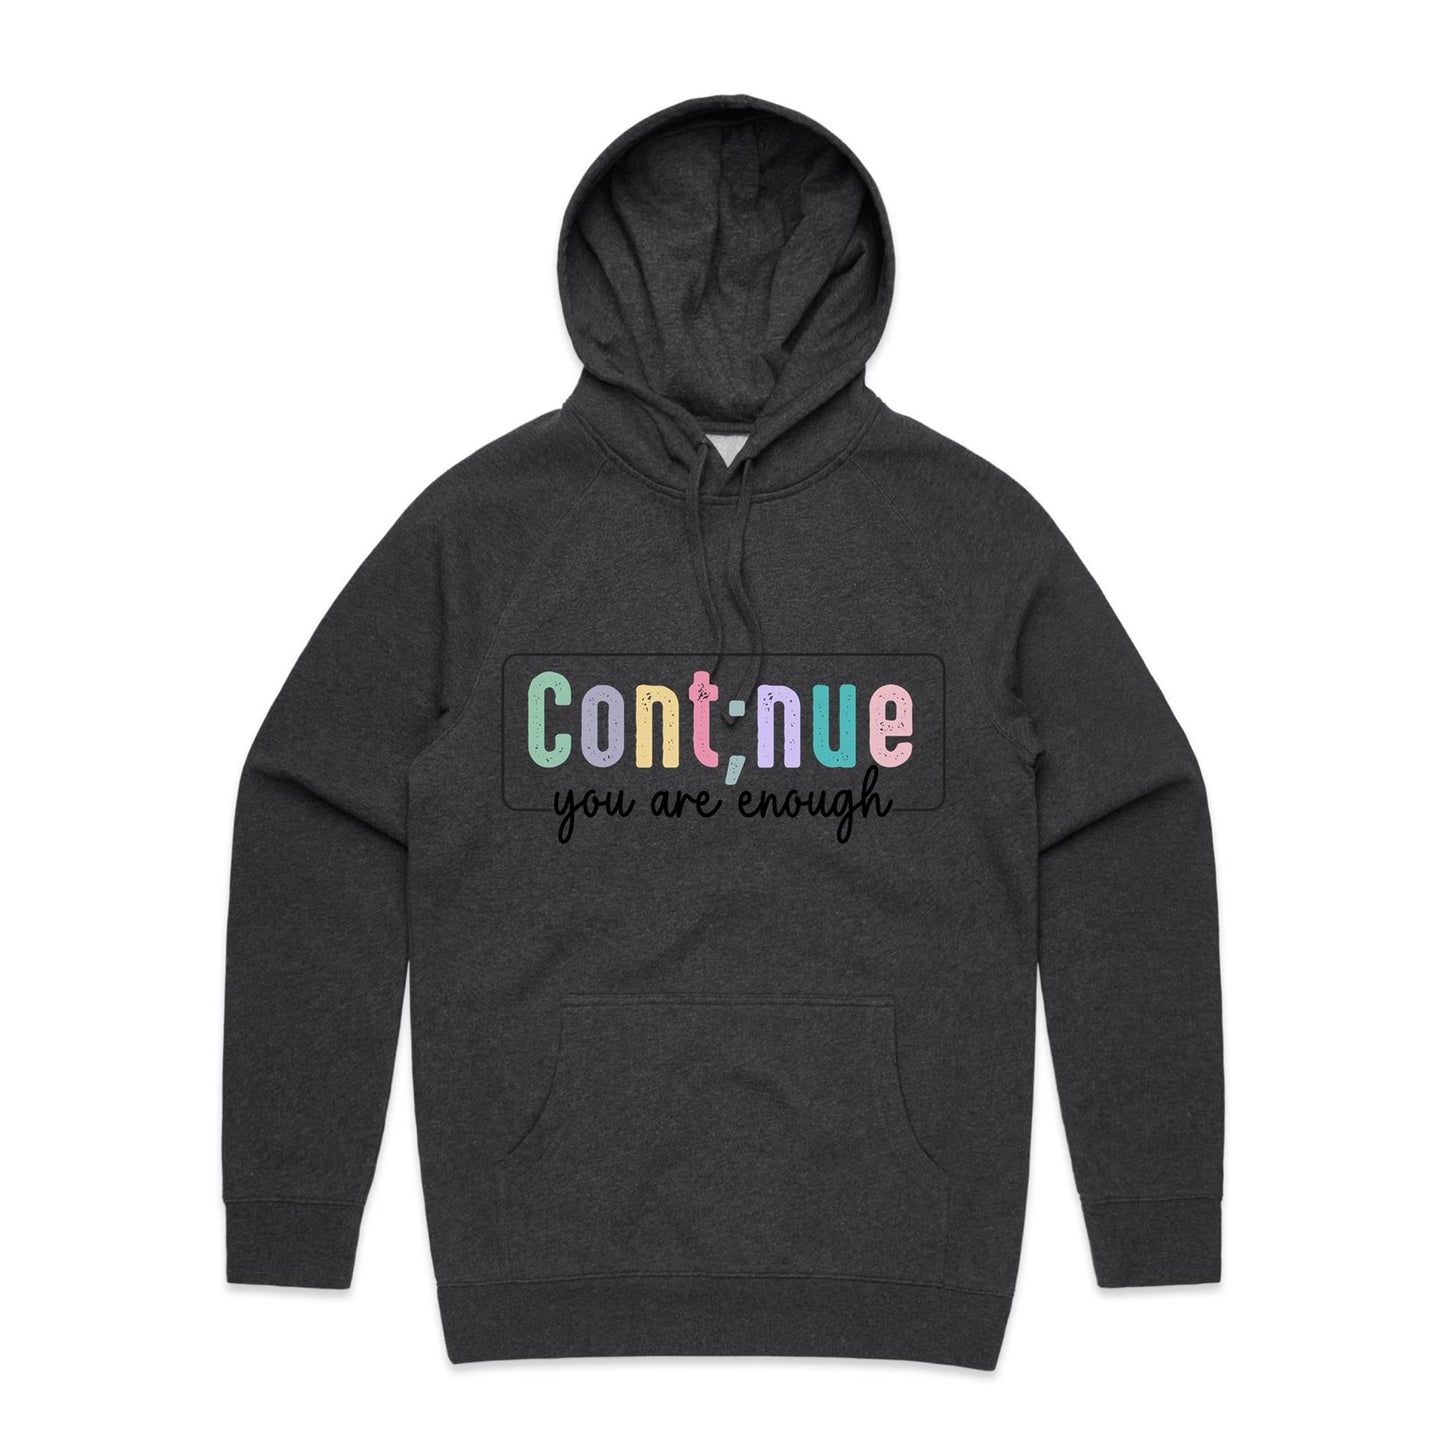 Unisex Hoodie - Continue you are enough